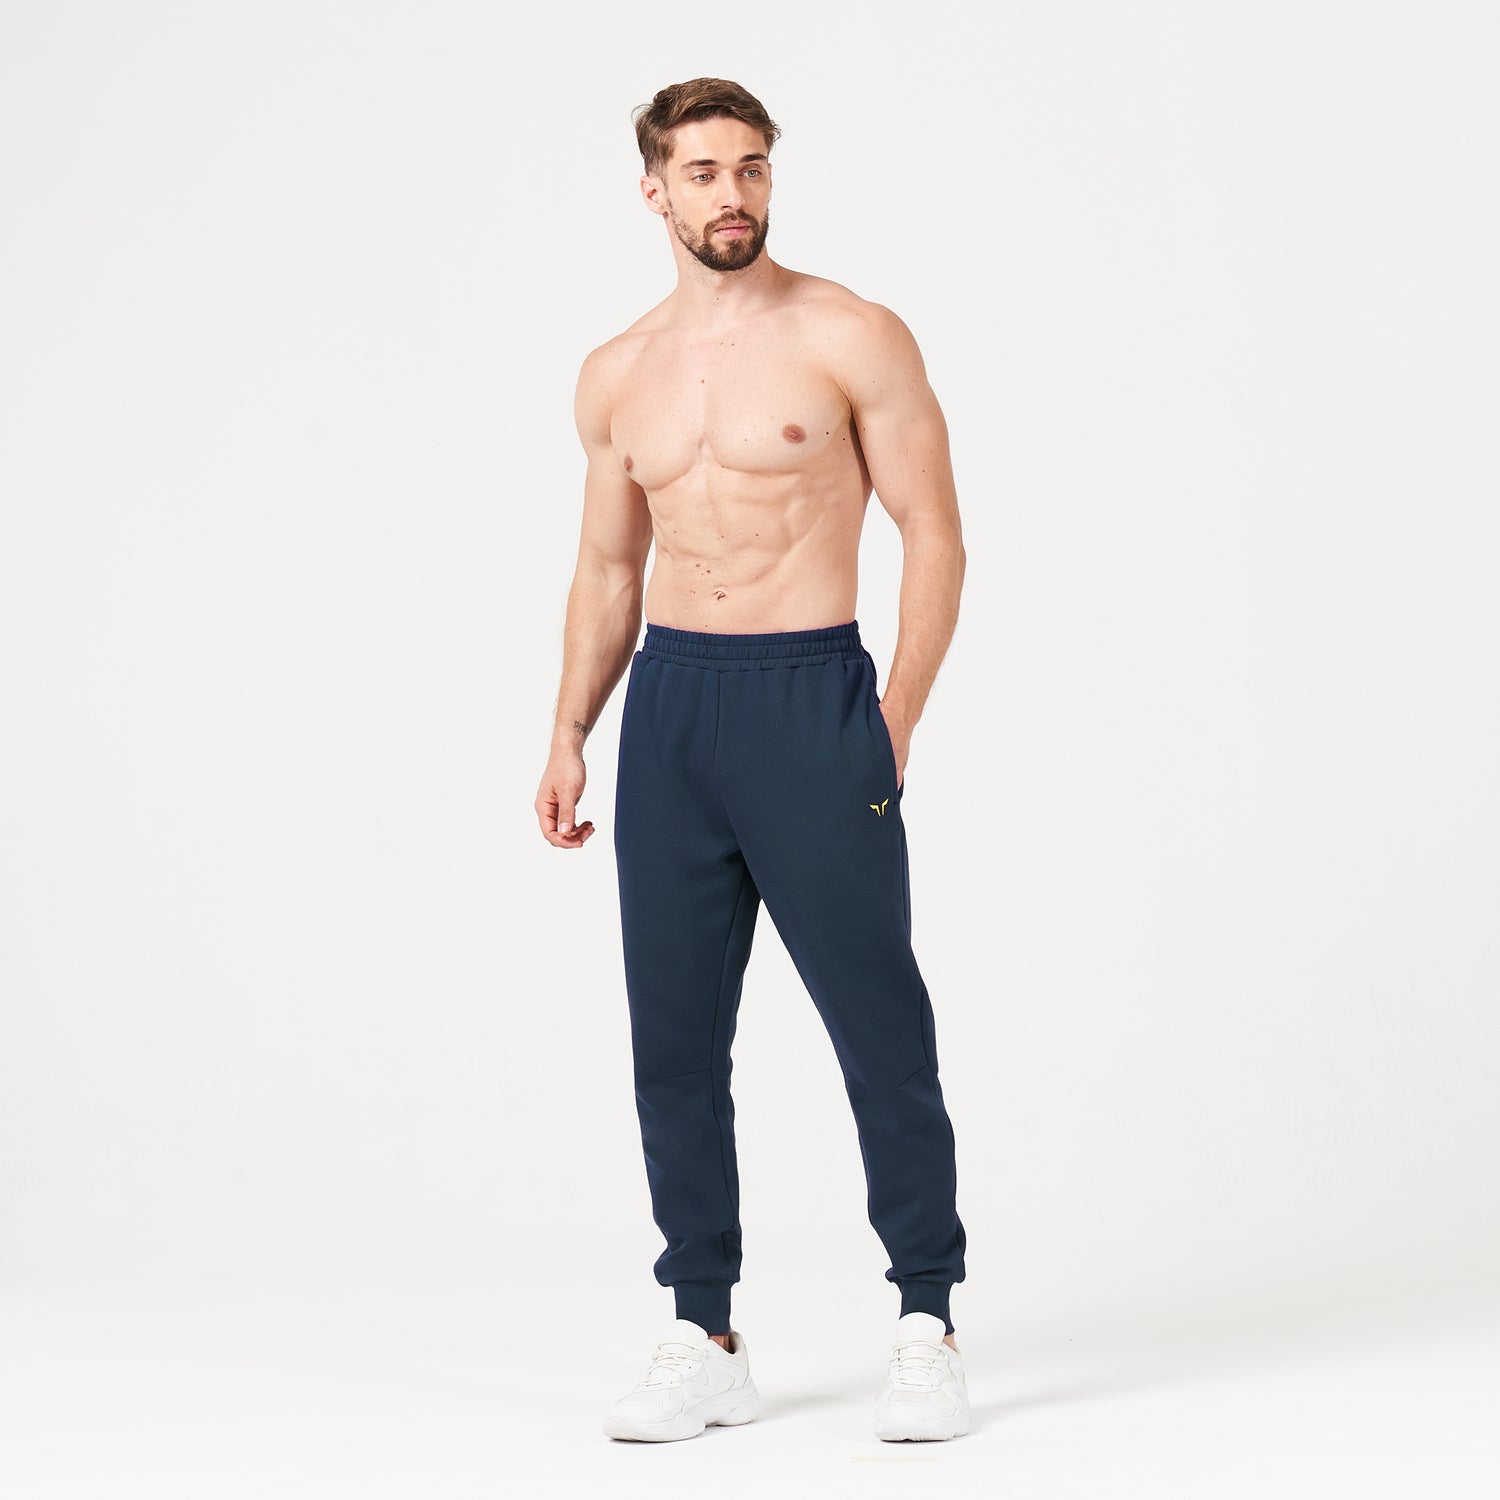 squatwolf-gym-wear-lab360-drylite-joggers-navy-workout-pants-for-men